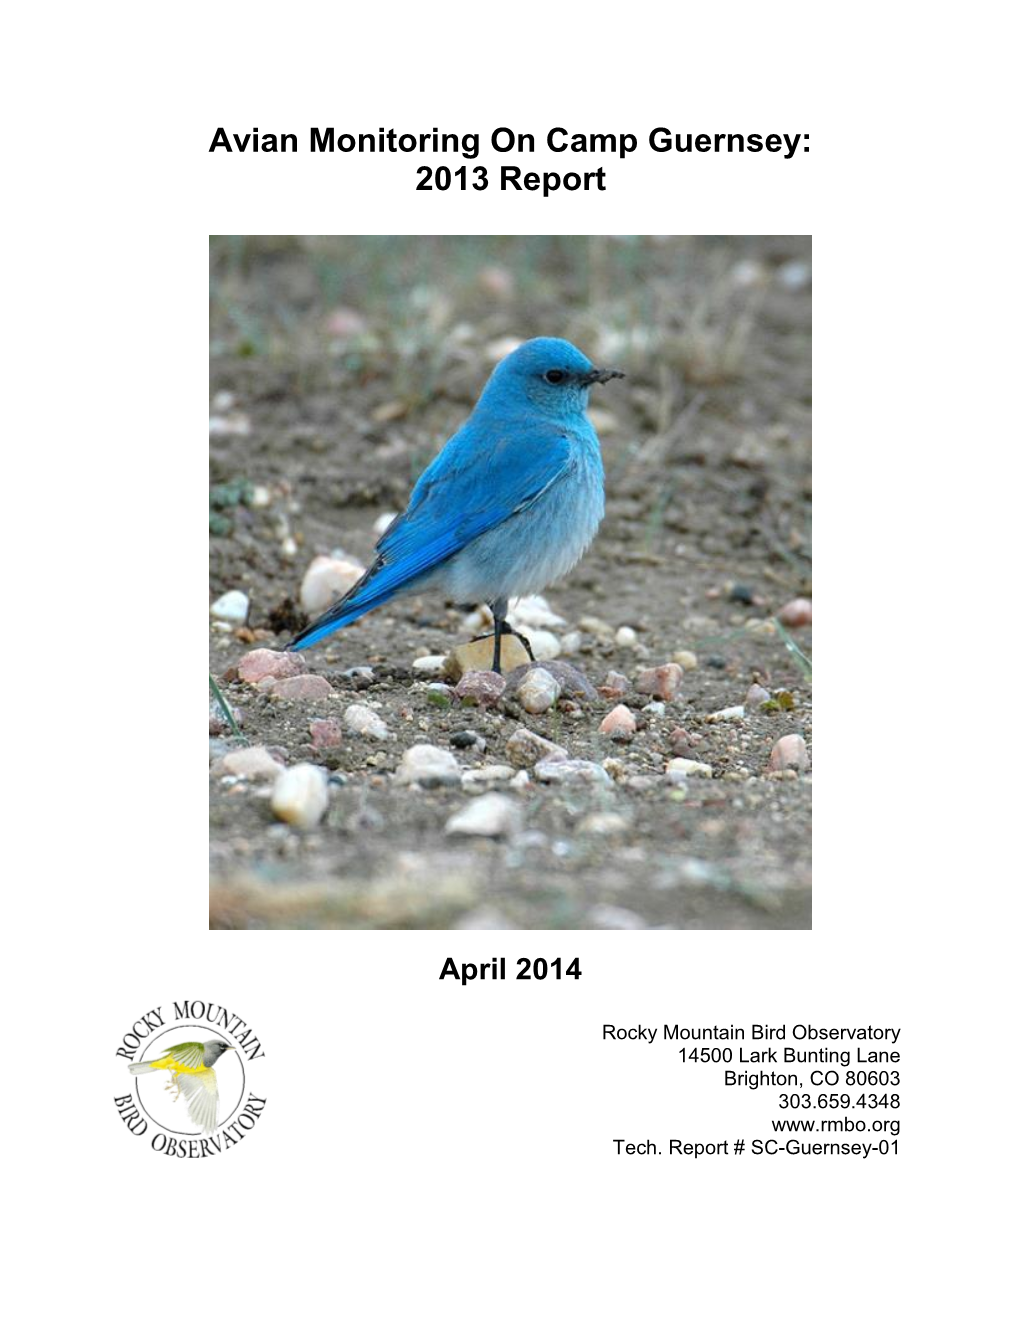 Avian Monitoring on Camp Guernsey: 2013 Report